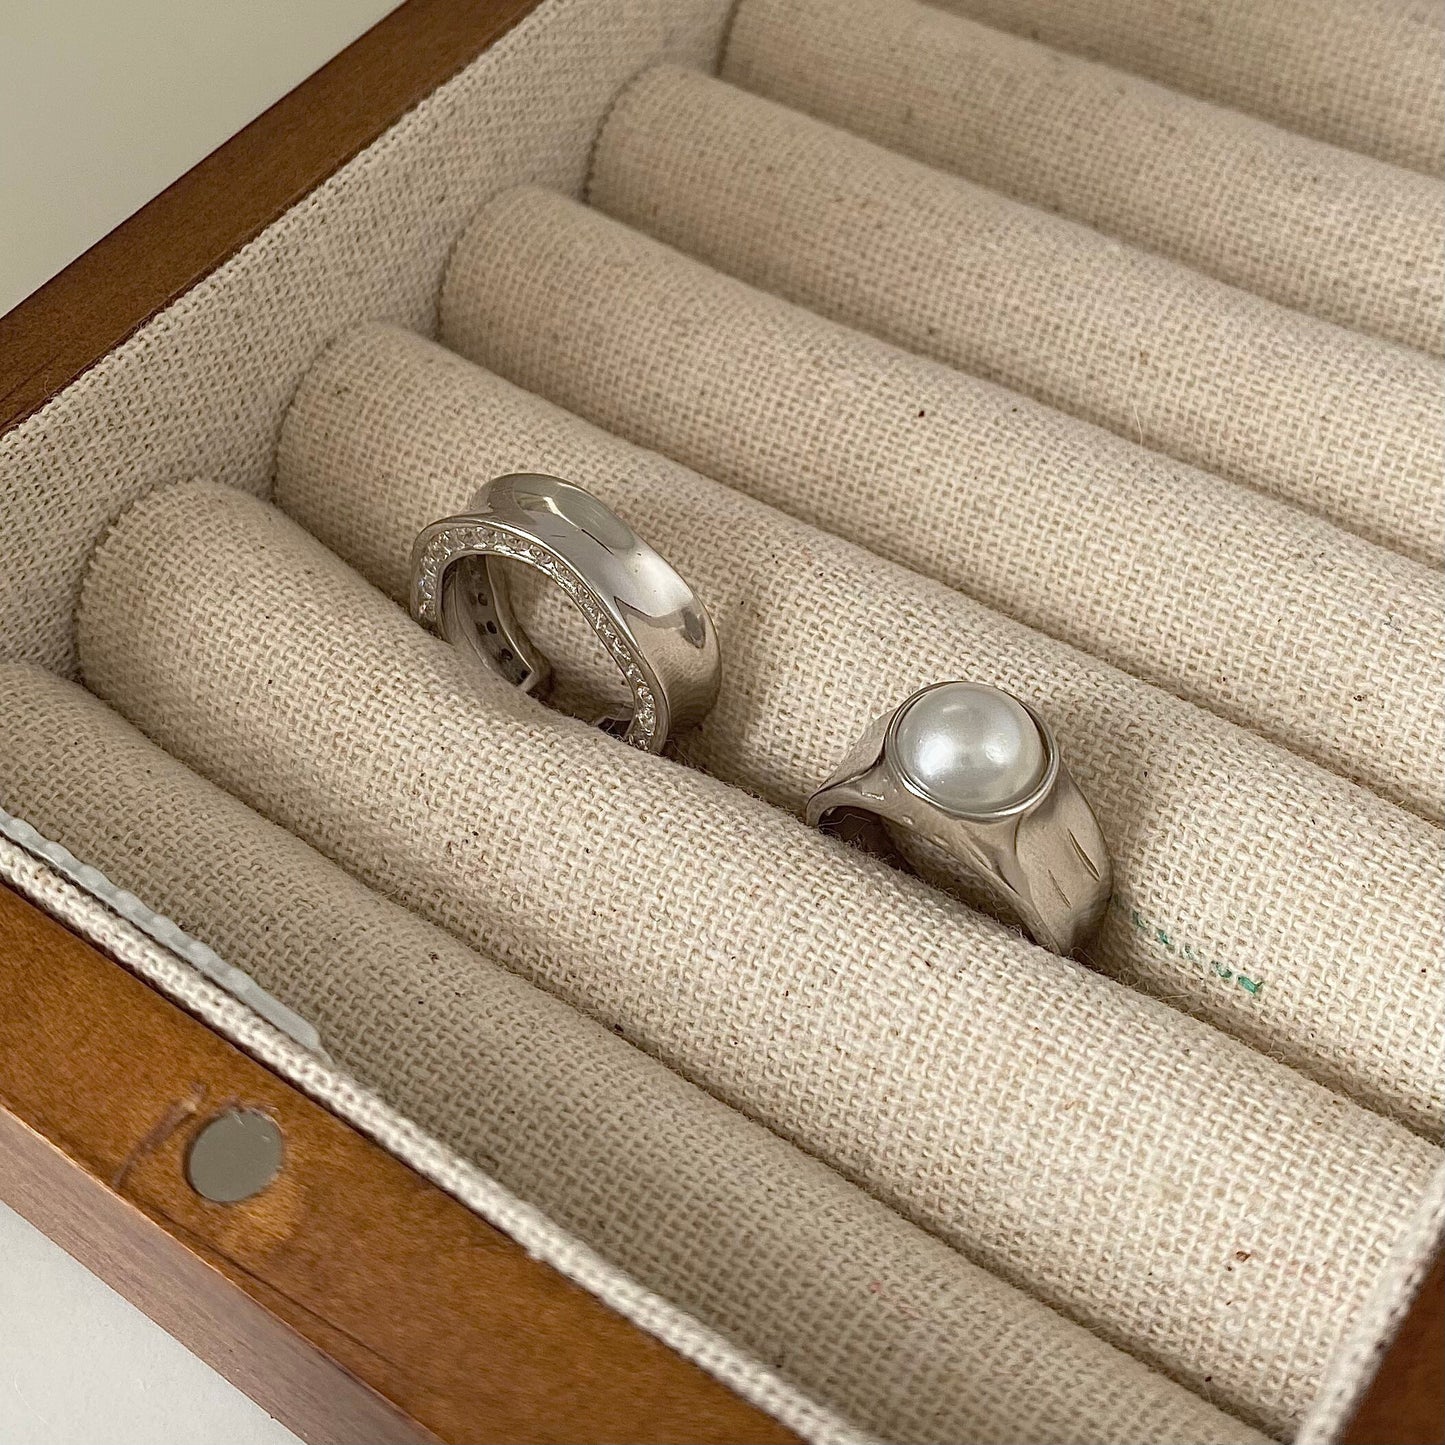 Vintage Pearl S925 Silver Chunky Ring